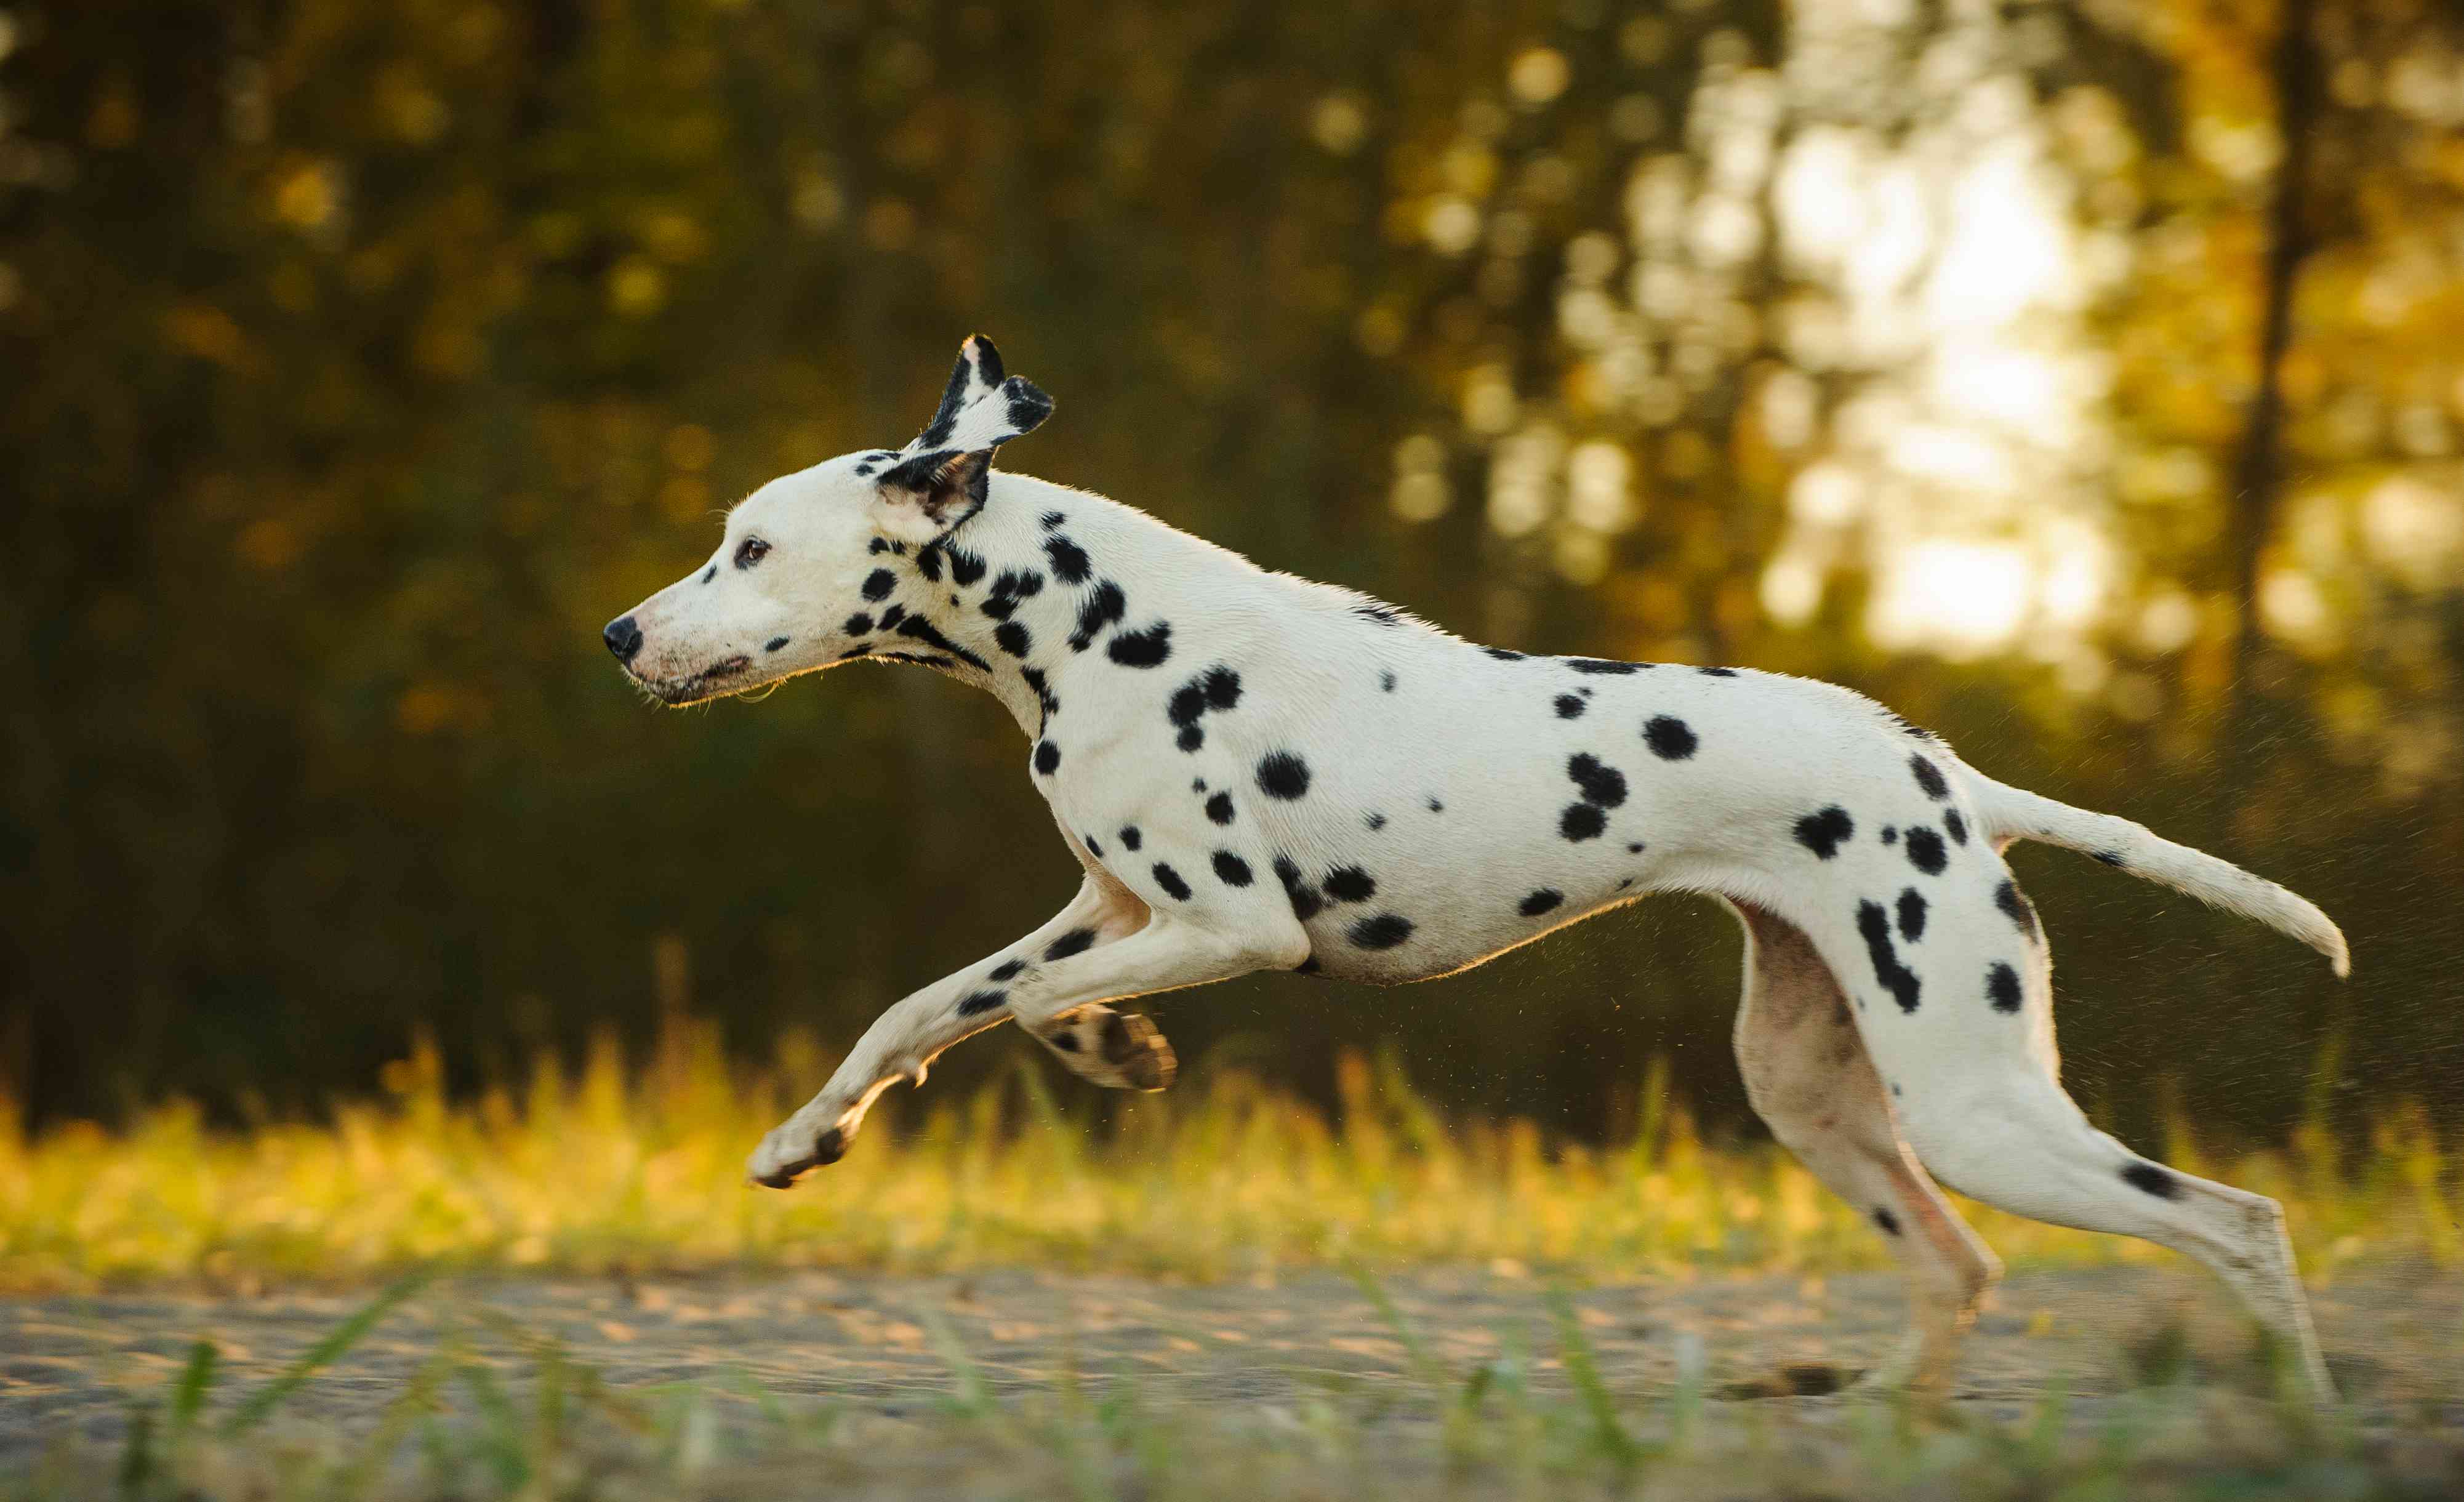 Dalmatian running with trees in background